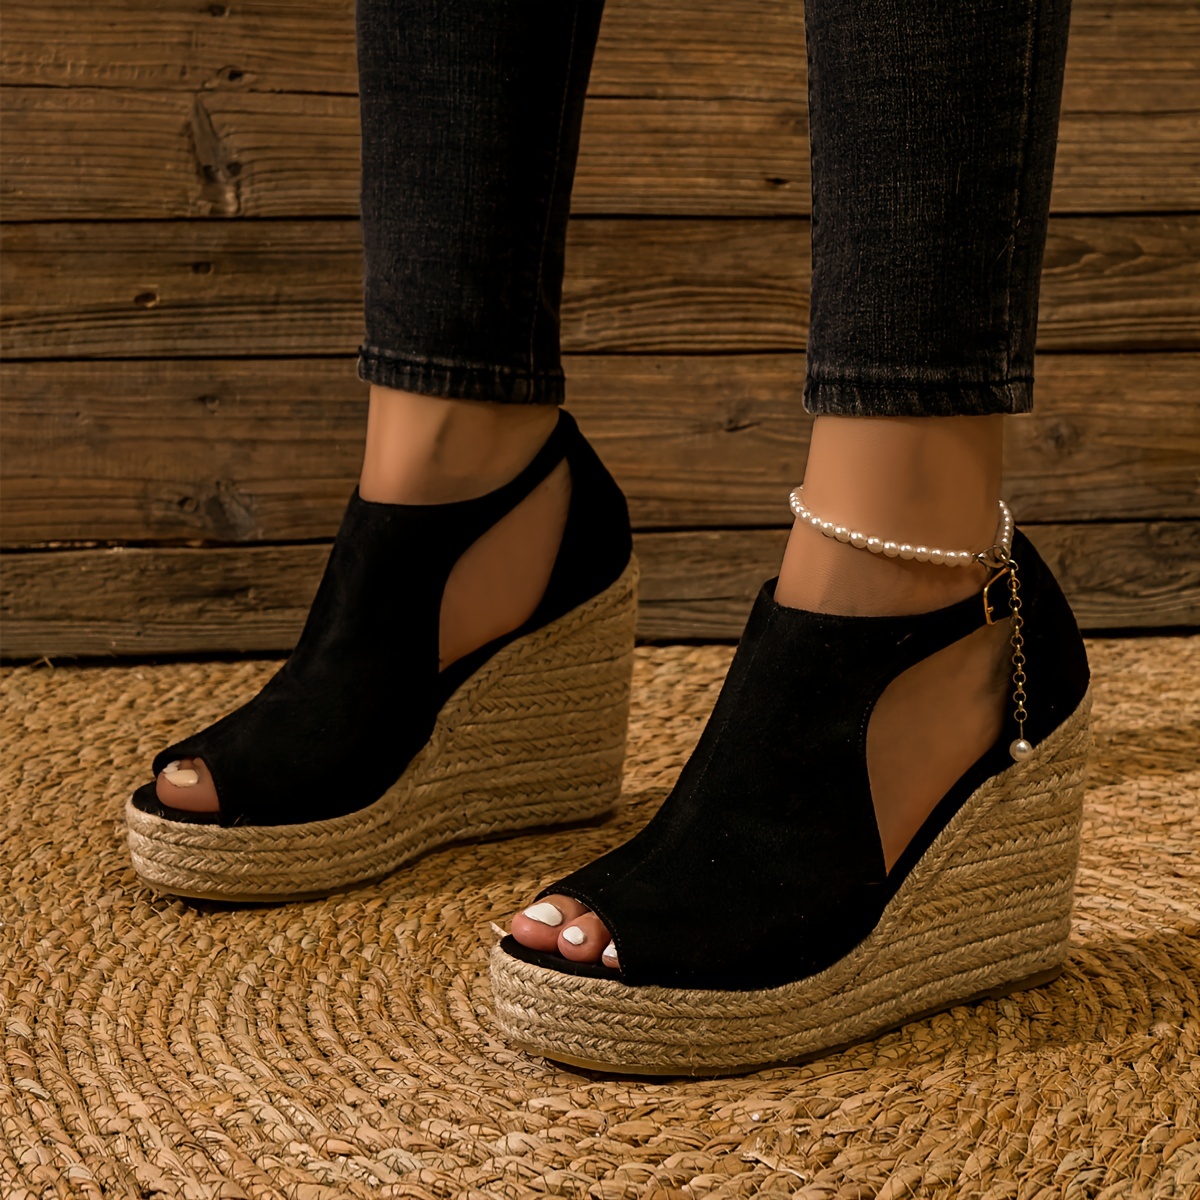 

Women's Espadrille Wedge Sandals, Peep Toe Cut-out Buckle Strap High Heels, Fashion Platform Sandals For Holiday